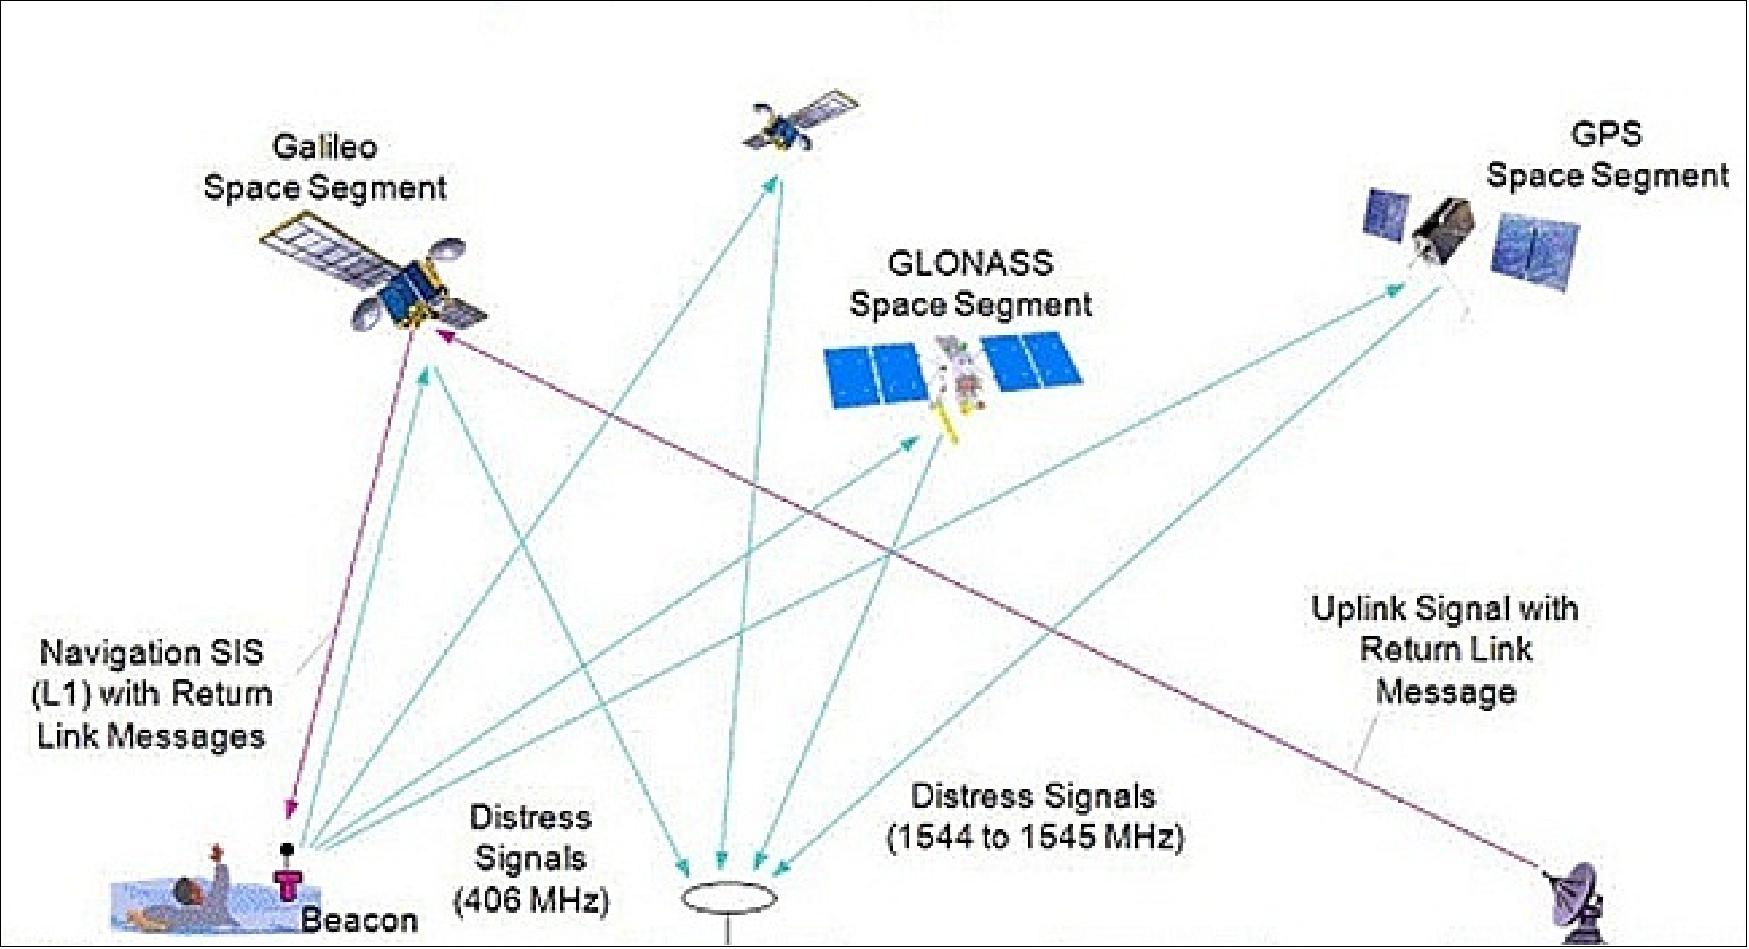 Figure 101: Galileo within new system: Like the US GPS and Russian GLONASS, European Galileo satellites are carrying COSPAS–SARSAT MEOSAR (Medium Earth Orbit Search and Rescue) transponders (image credit: NOAA) 130)